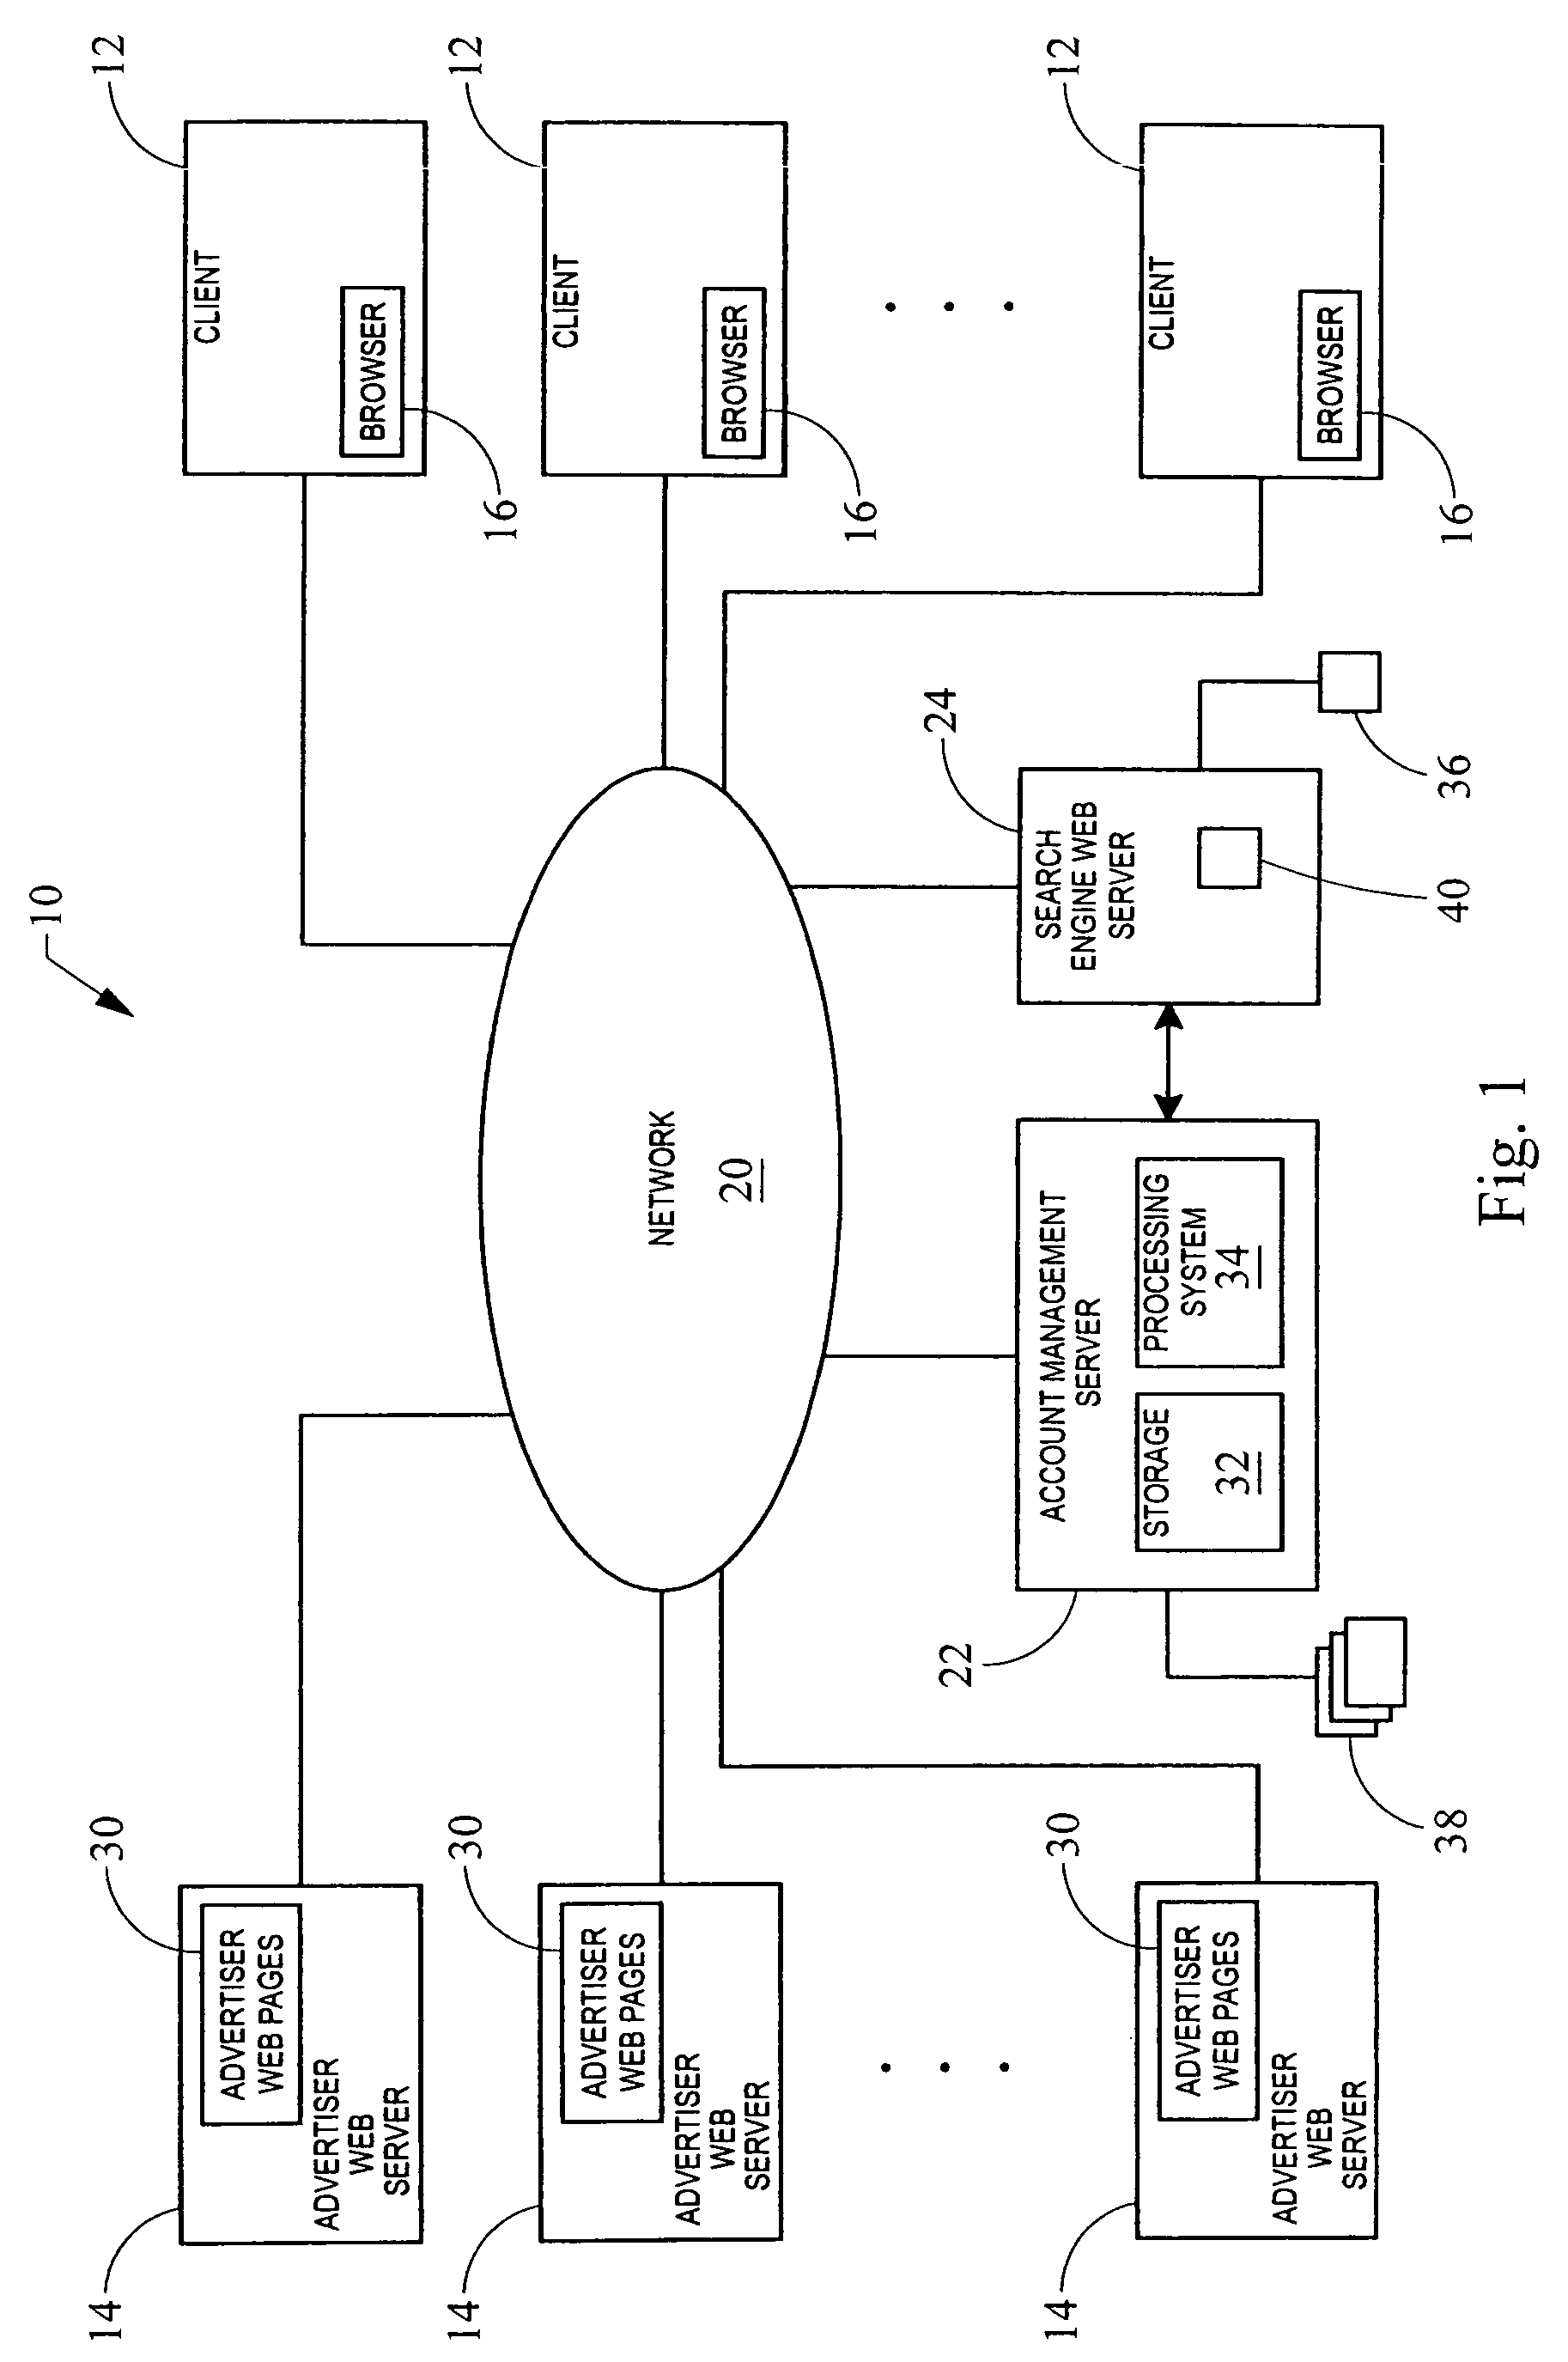 System and method for enabling multi-element bidding for influencing a position on a search result list generated by a computer network search engine